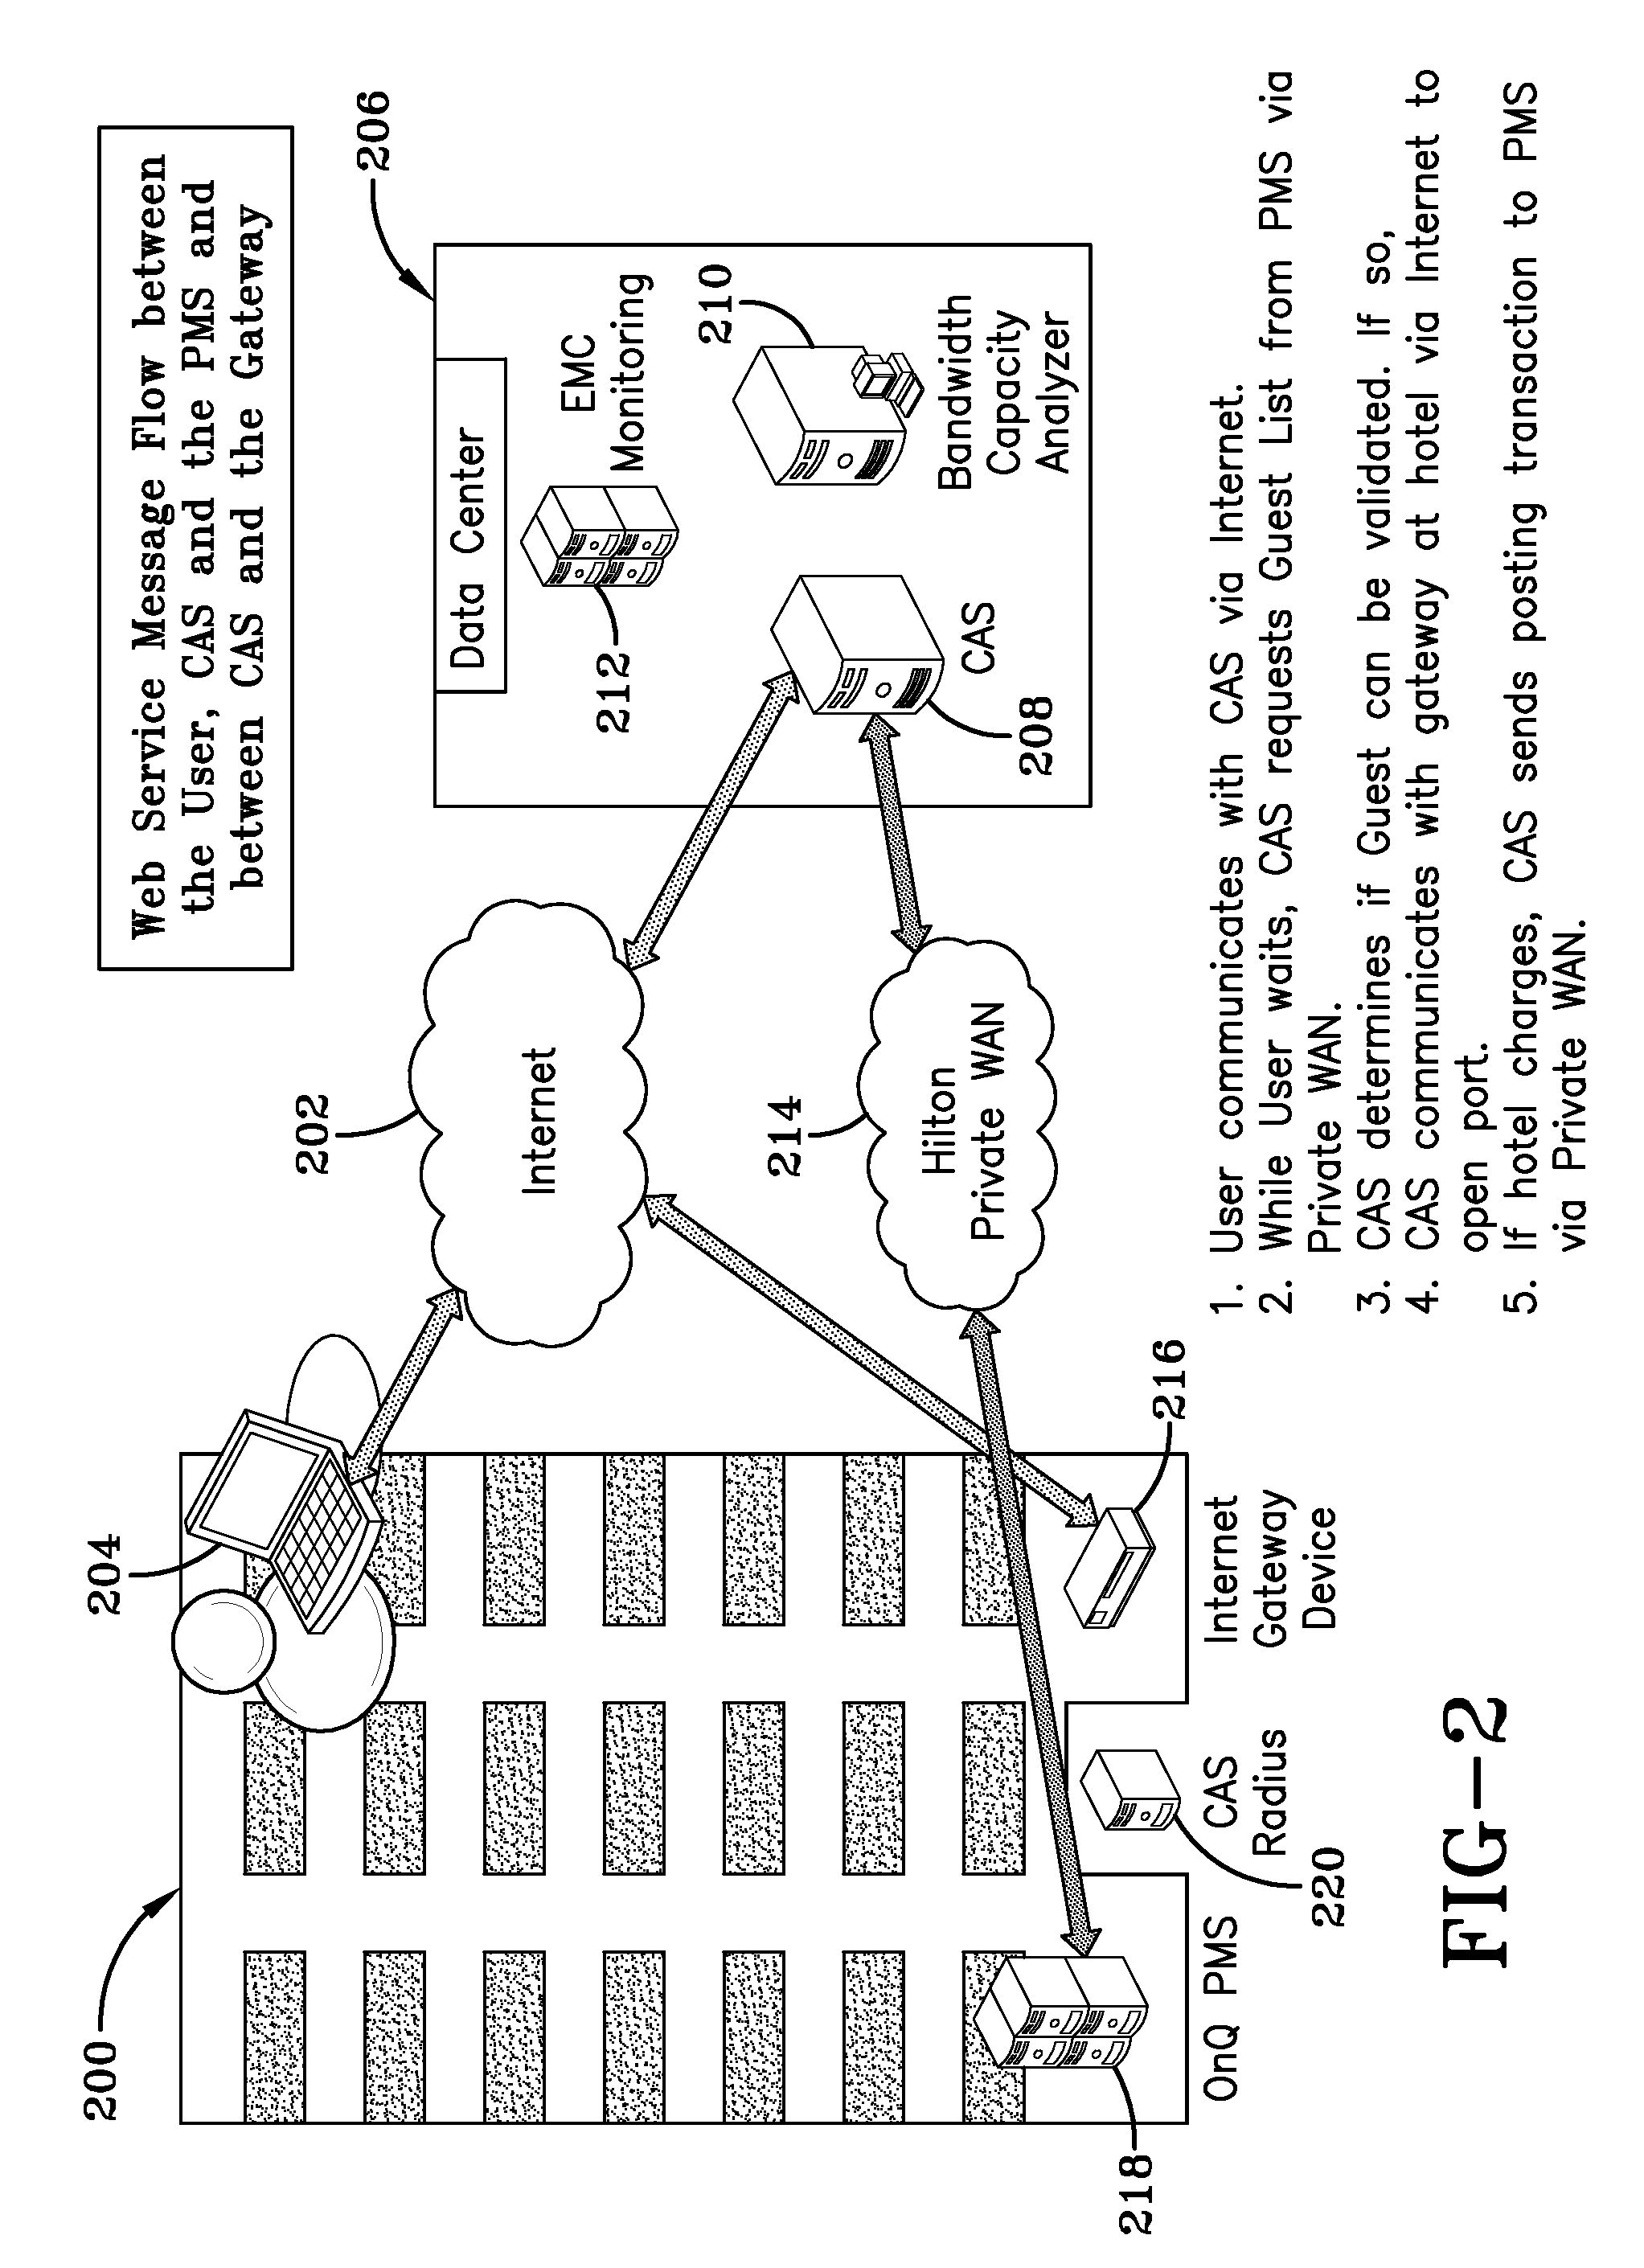 System and method for providing internet access services at hotels within a hotel chain